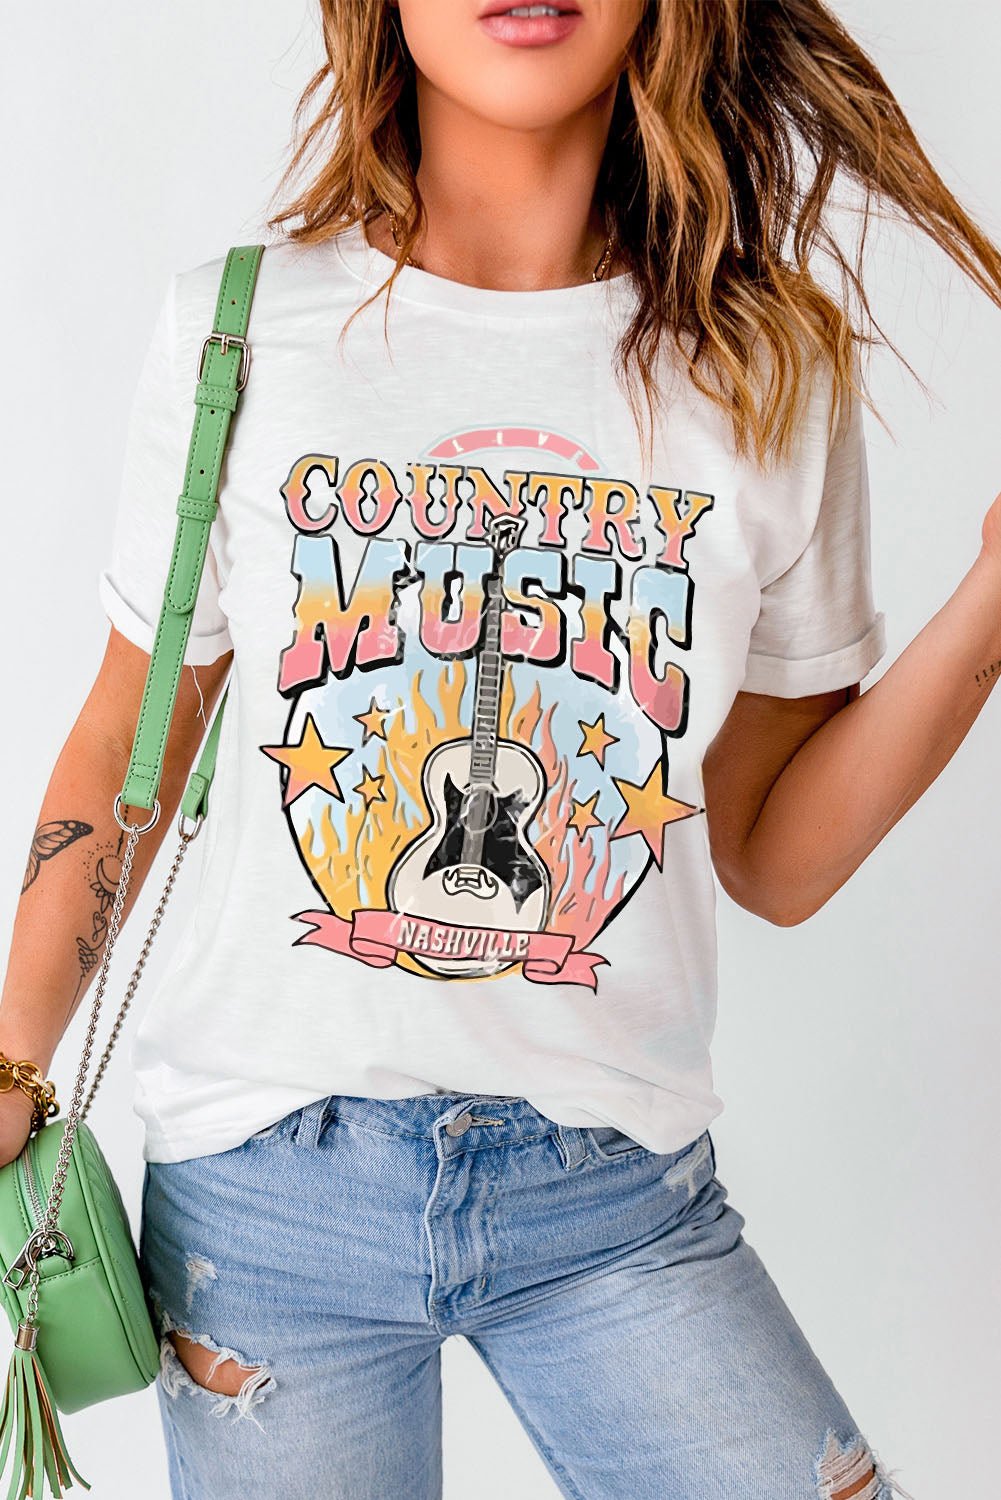 Country Music Nashville Graphic Tee Shirt - Let the Sweet Melodies of Country Romance You - Feel Ultimate Comfort and Style. - Guy Christopher